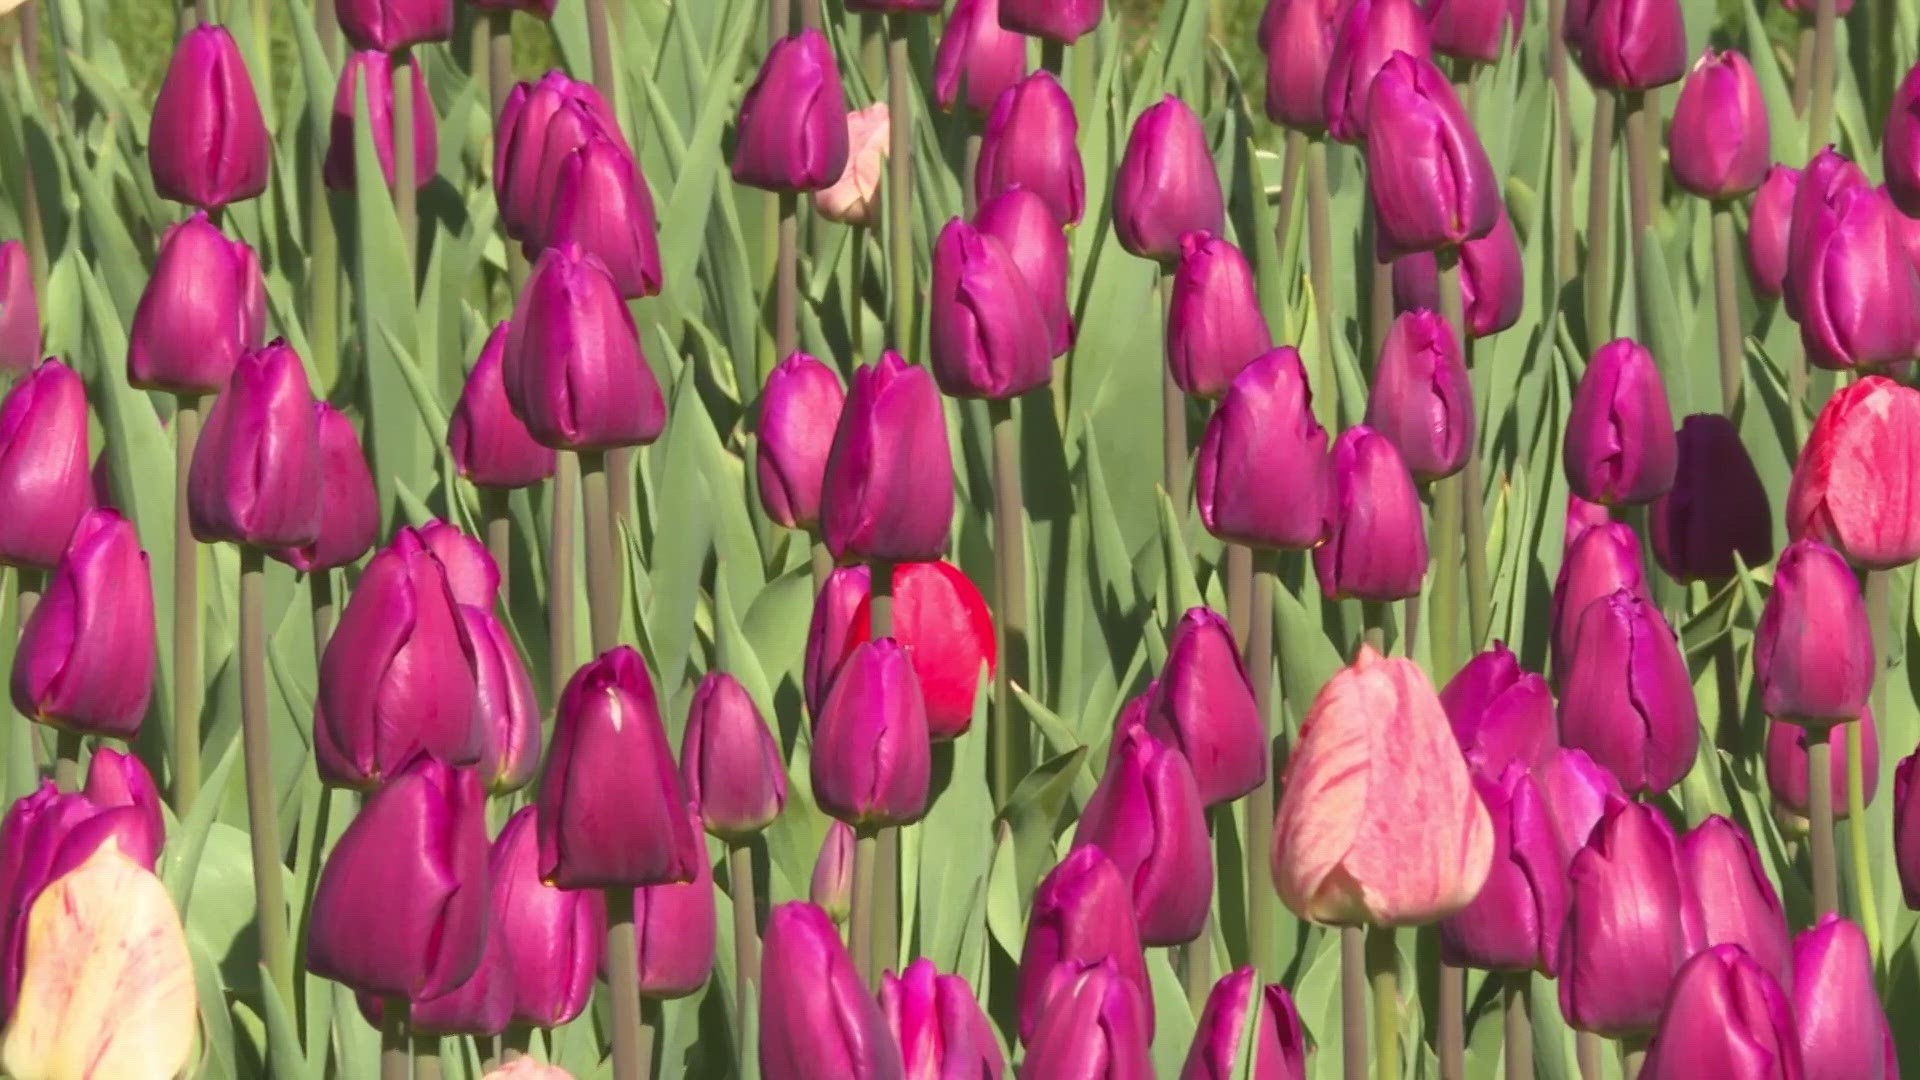 Meteorologist Blake Hansen checked in with Tulip Time organizers to see how the tulips are faring in unseasonably cold weather.